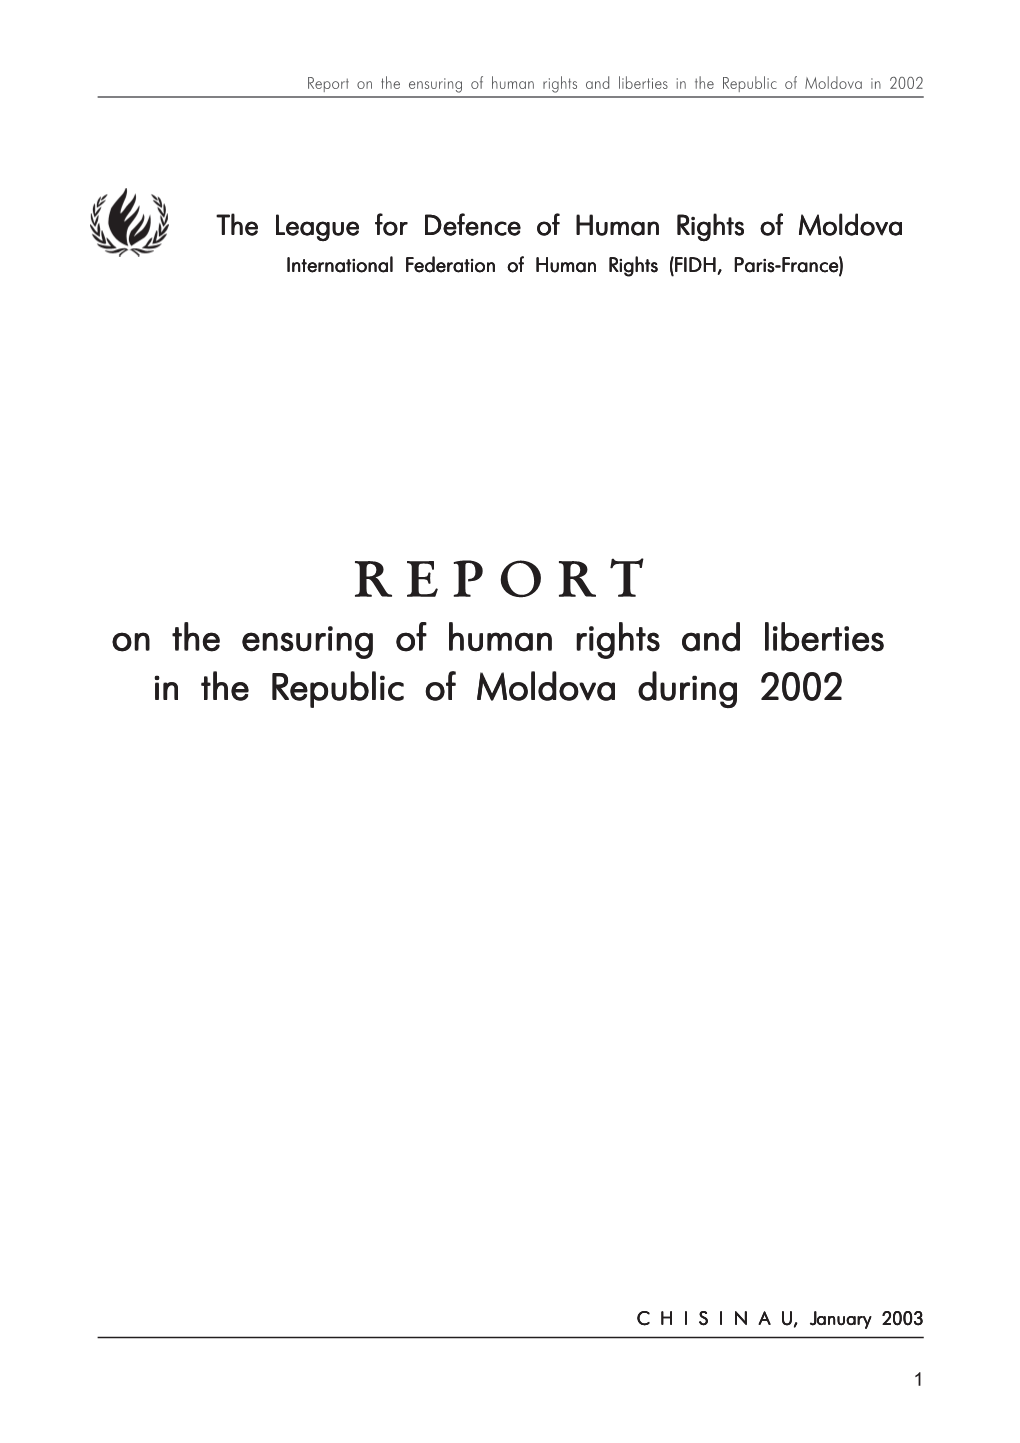 Report on the Ensuring of Human Rights and Liberties in the Republic of Moldova in 2002